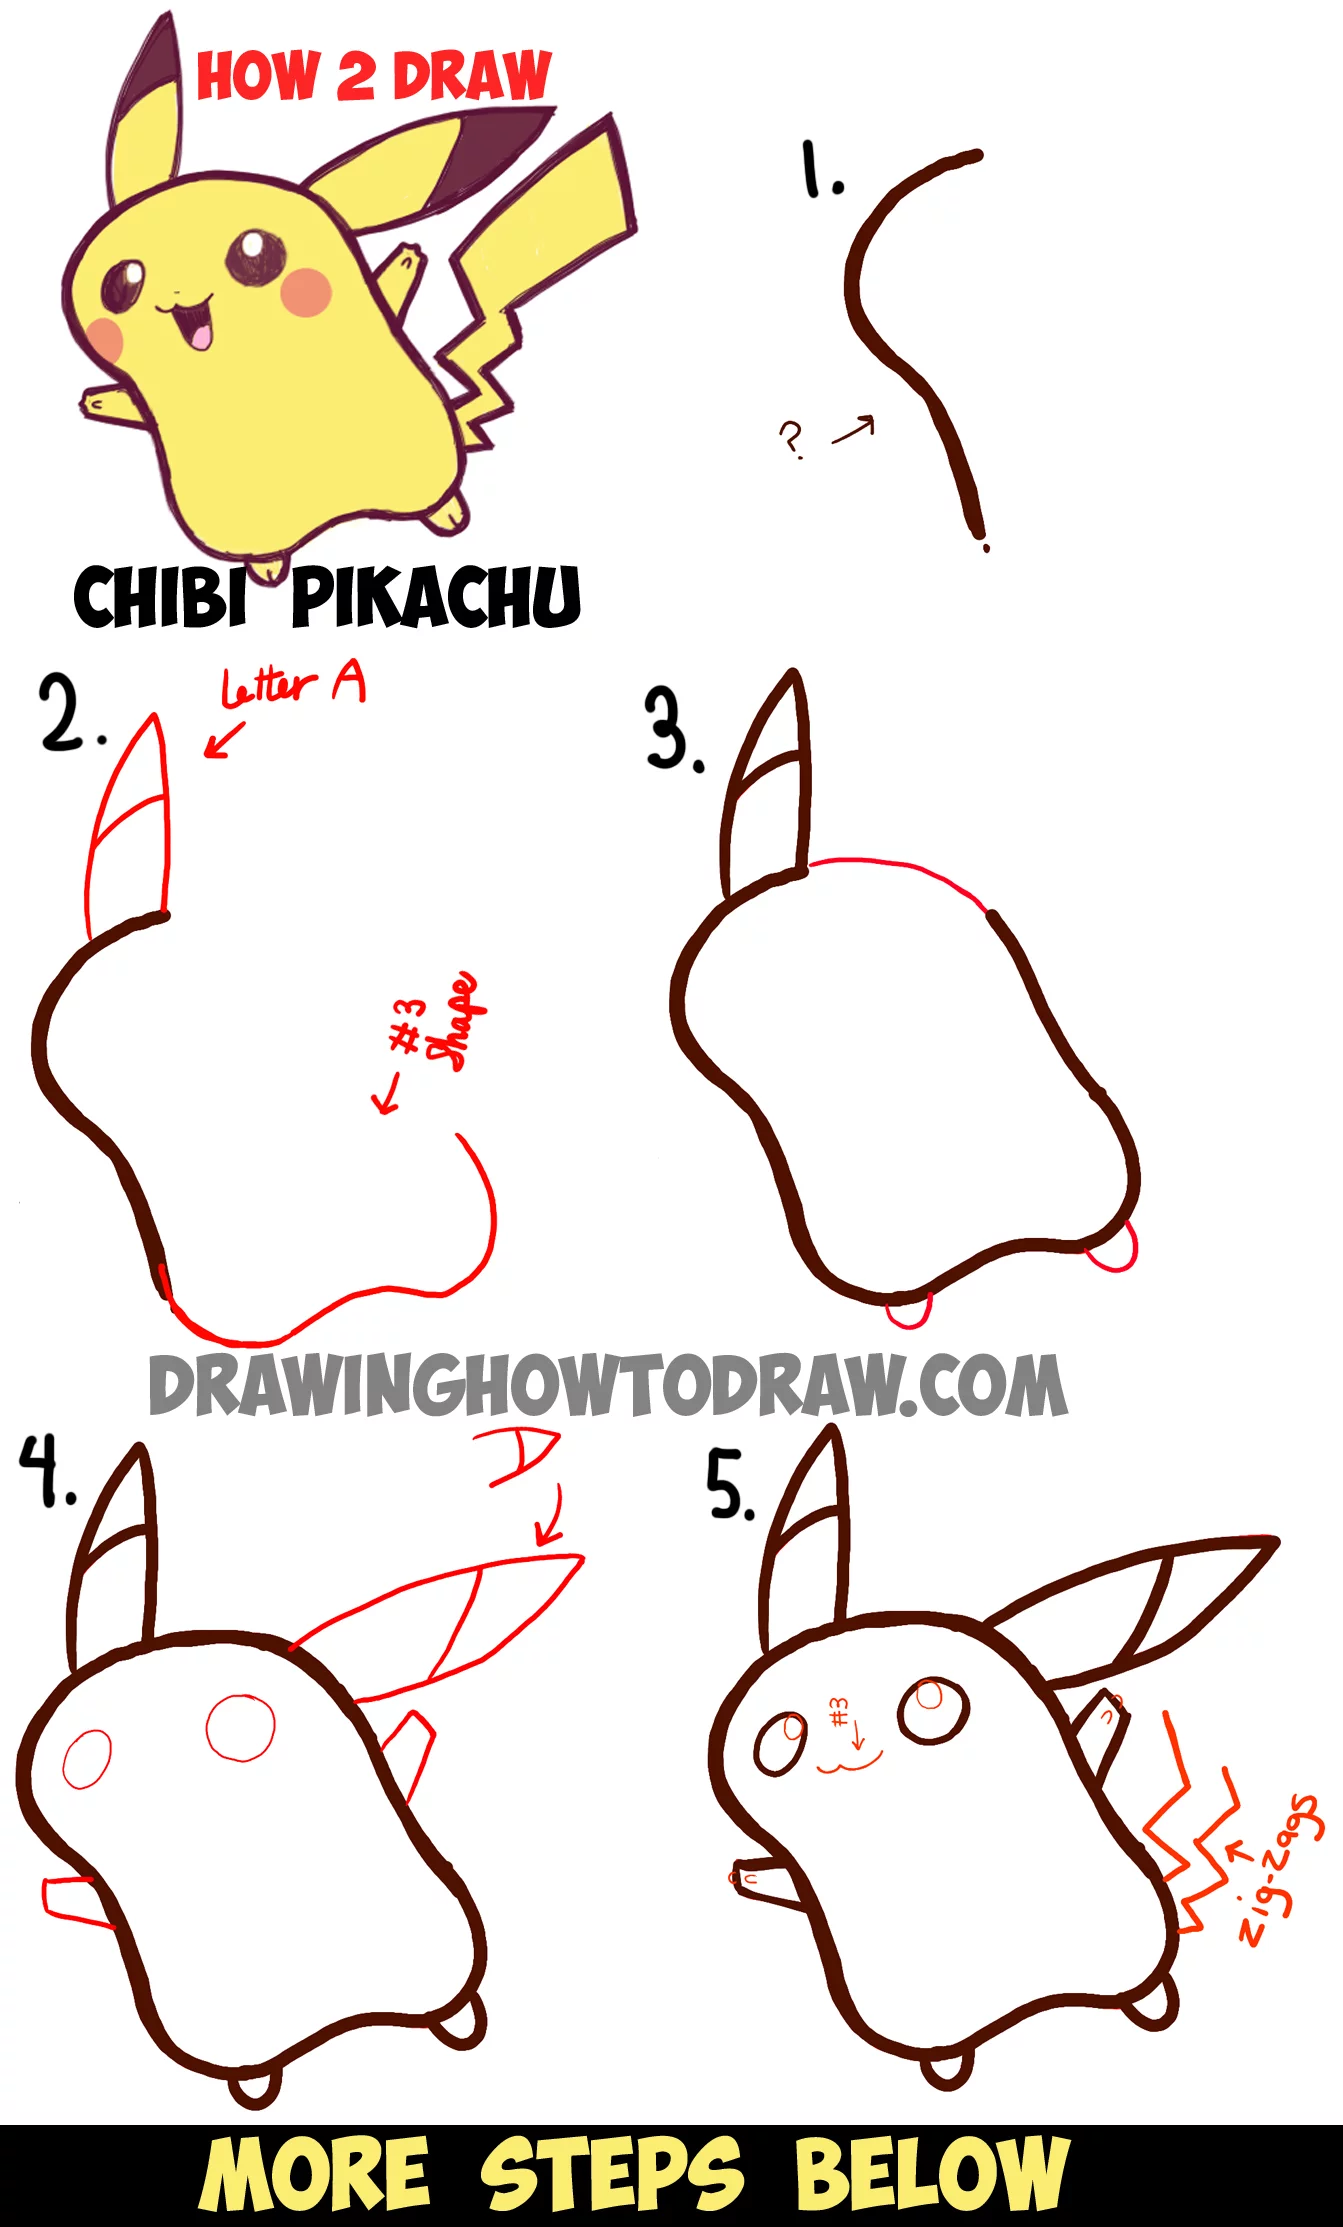 How To Draw Cute Baby Chibi Pikachu From Pokemon Step By Step Drawing Tutorial How To Draw Step By Step Drawing Tutorials